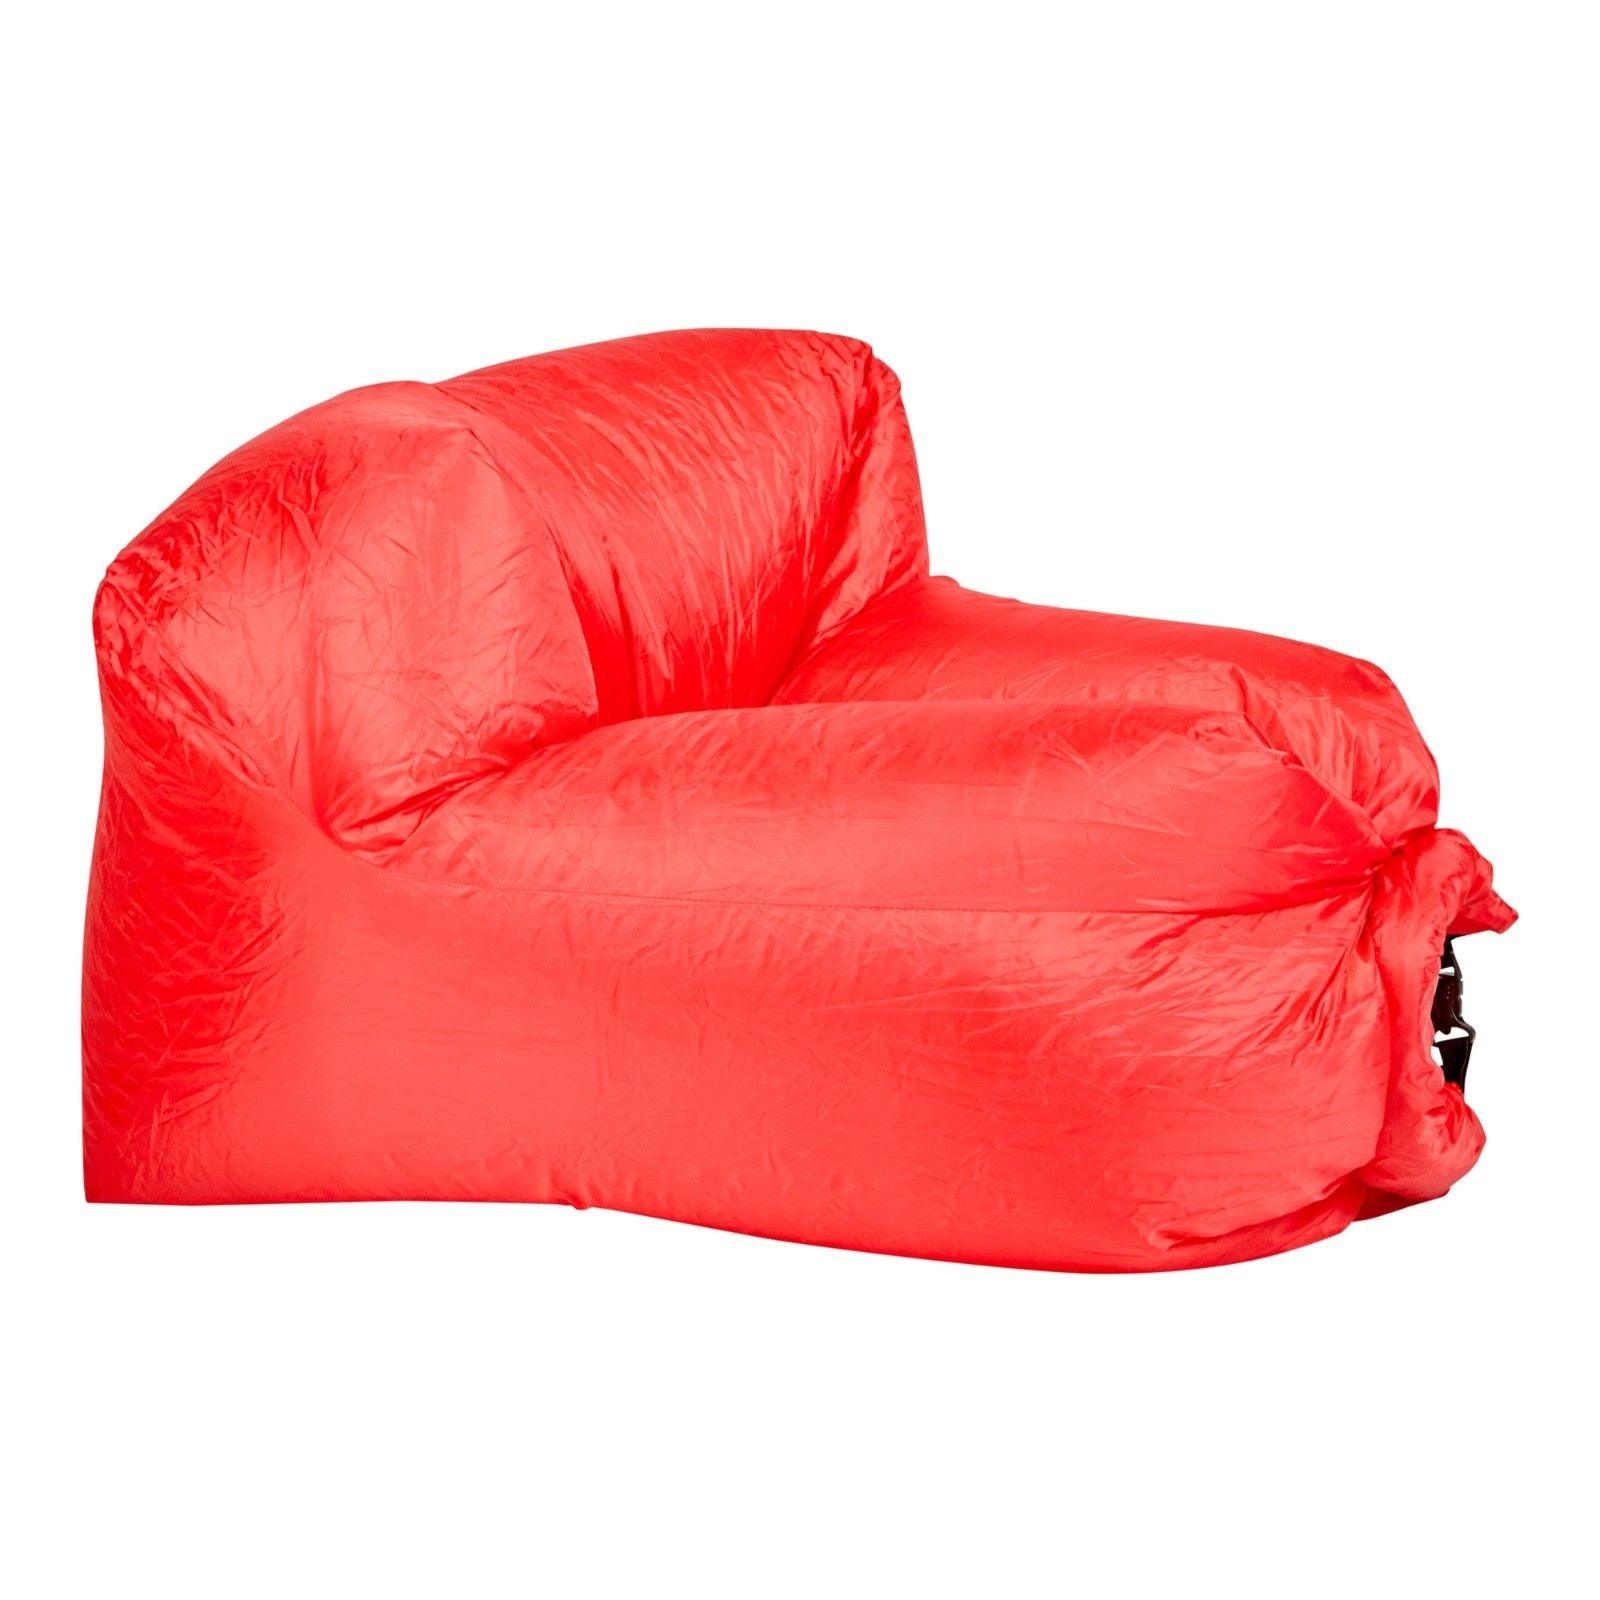 Milano Decor Inflatable Air Lounger for Beach Camping Festival Outdoor Lazy Lounge Chair - Red